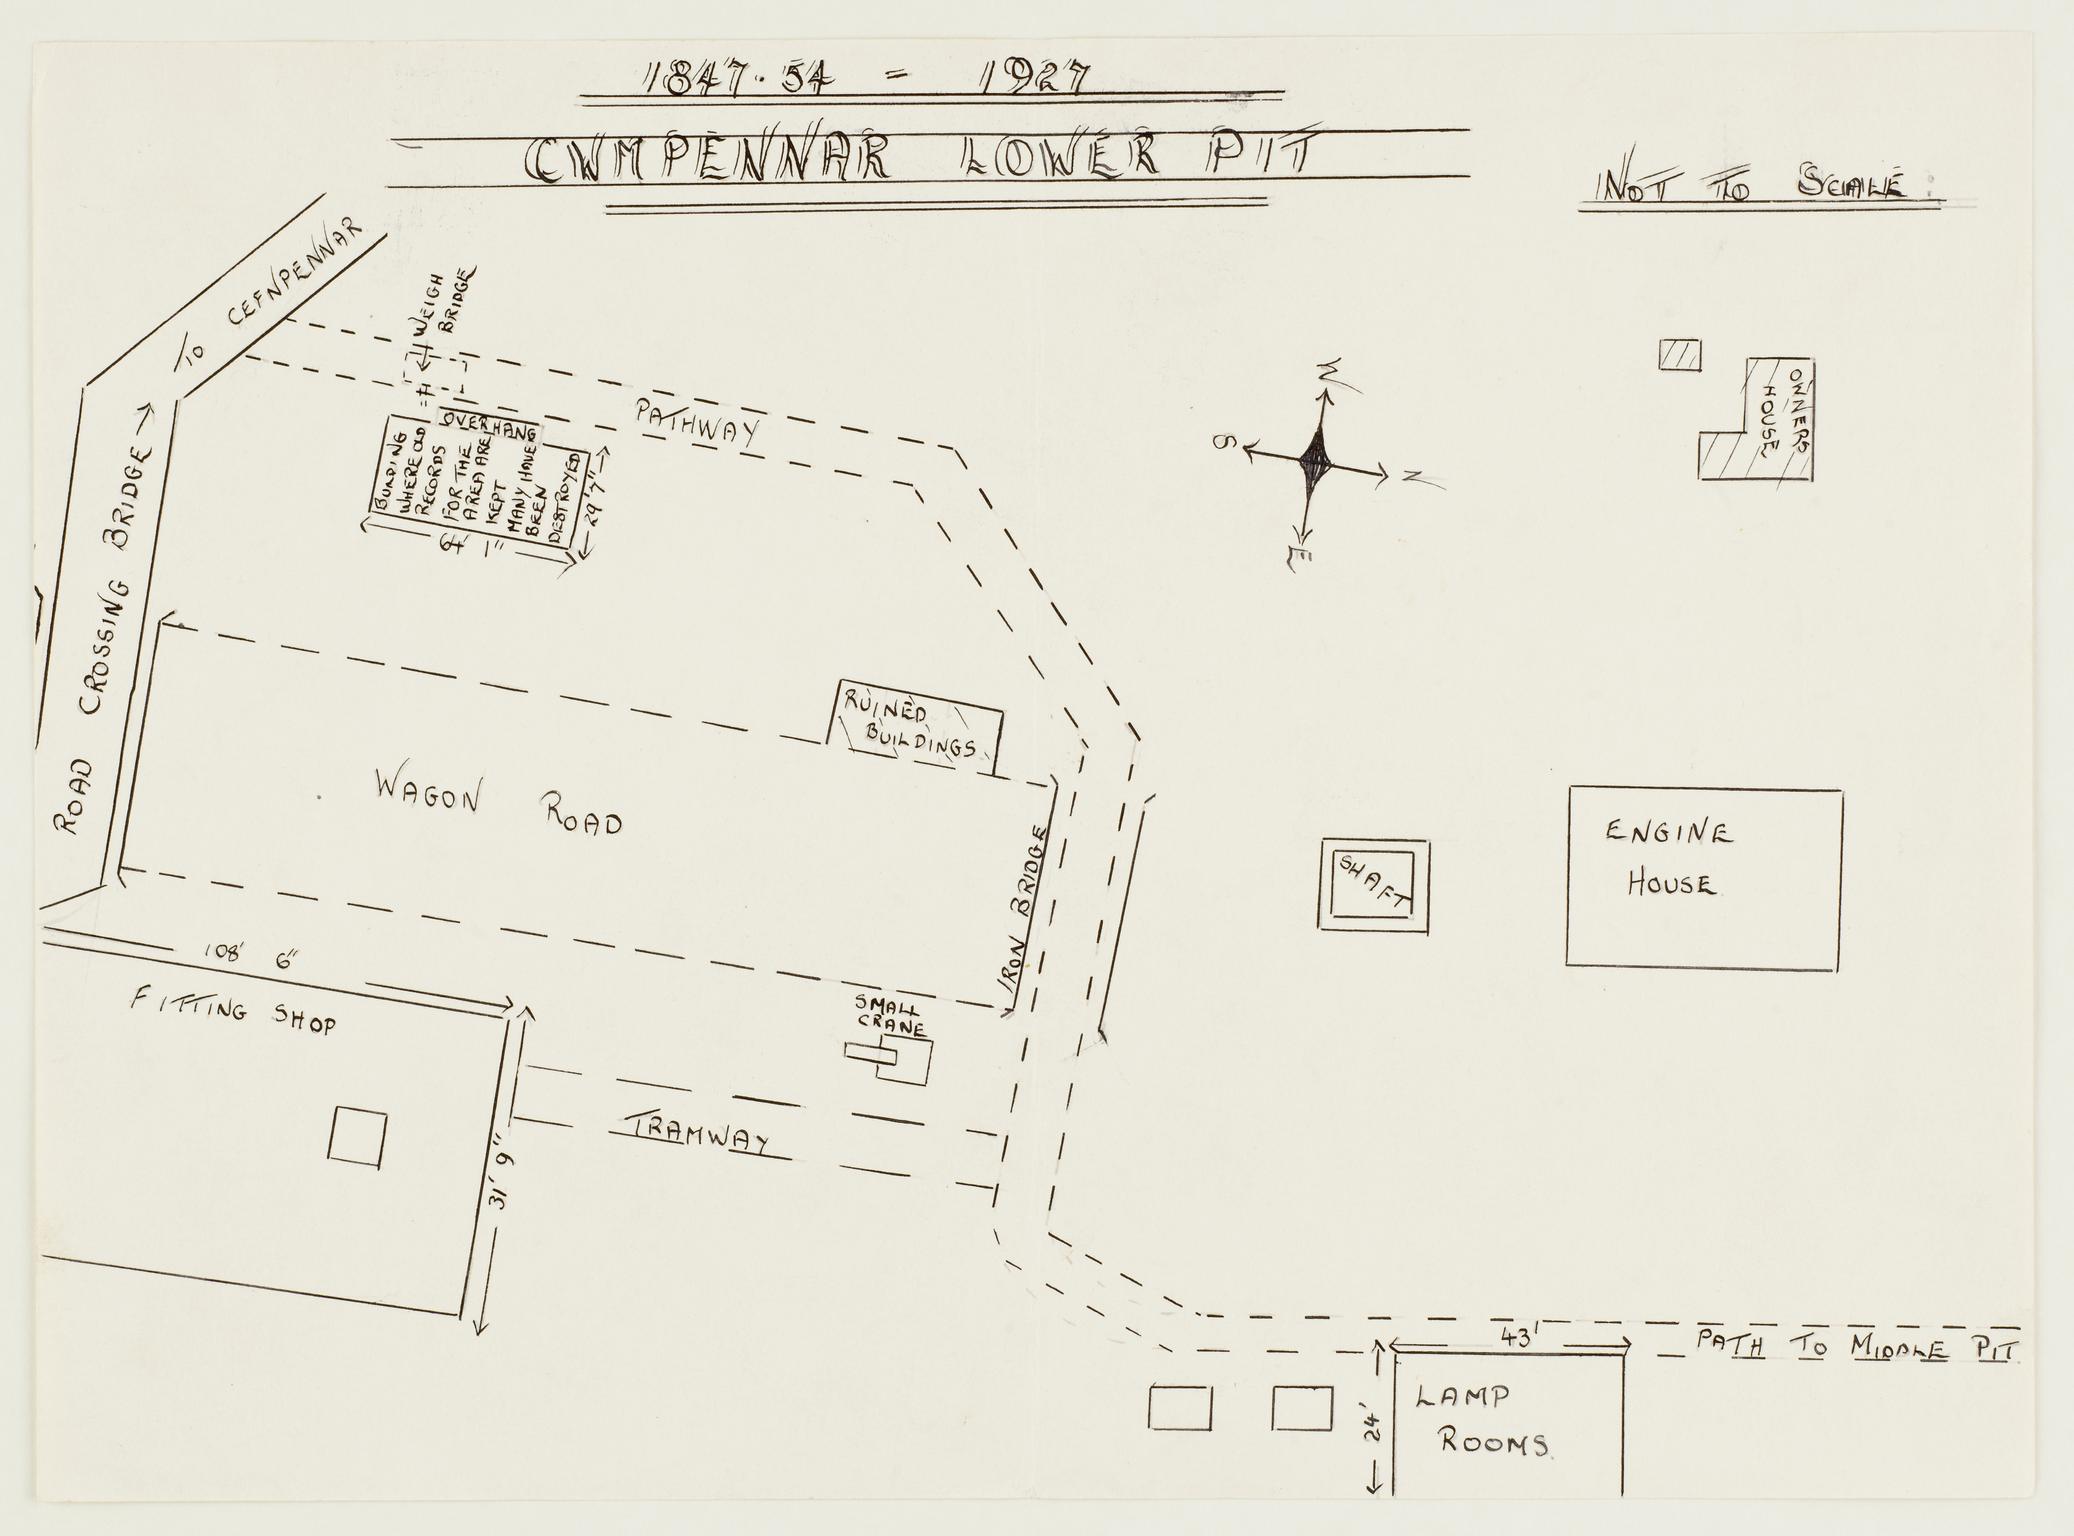 Cwmpennar Lower Pit. 1847-54 to 1927 (plan)